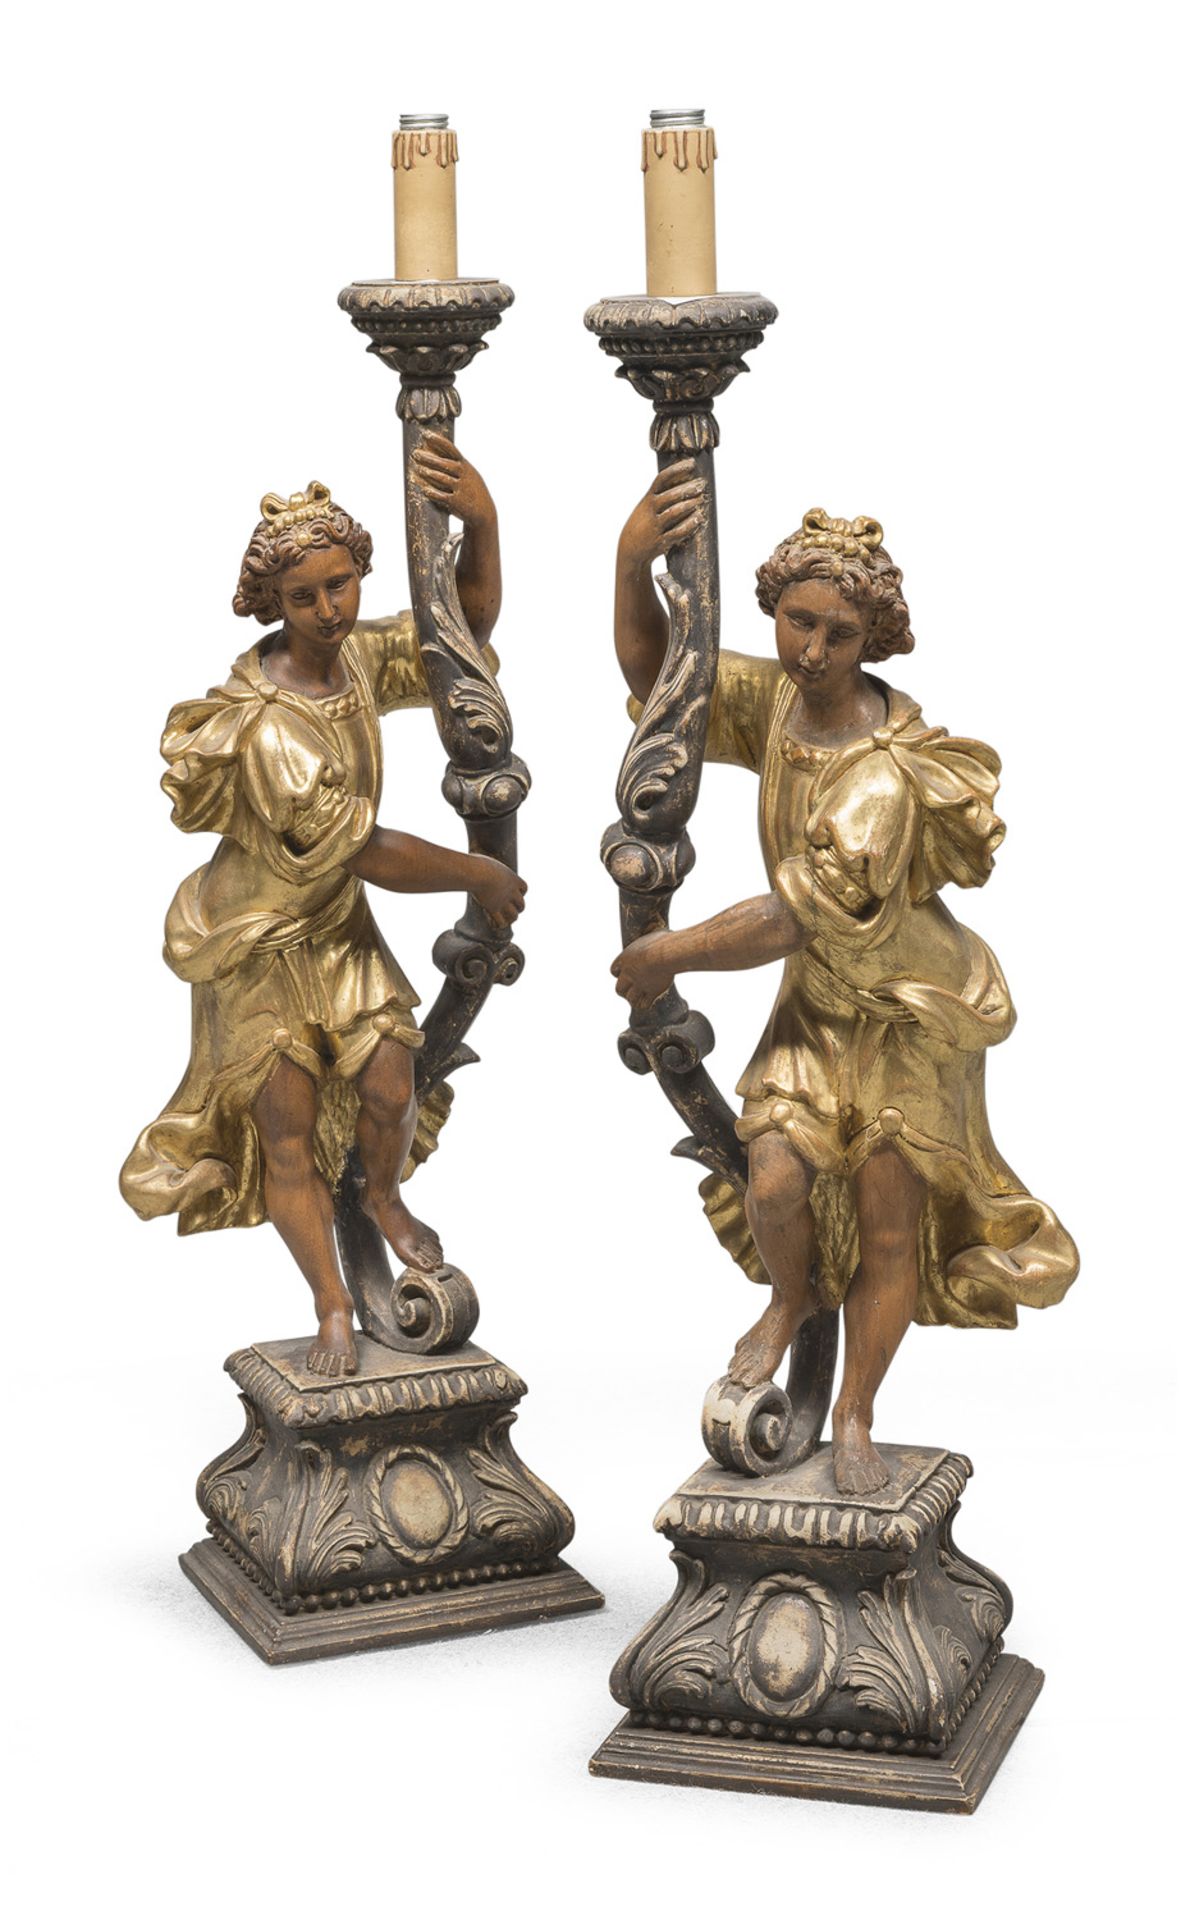 PAIR OF CANDLESTICKS IN GILDED AND LACQUERED WOOD LATE 18TH CENTURY